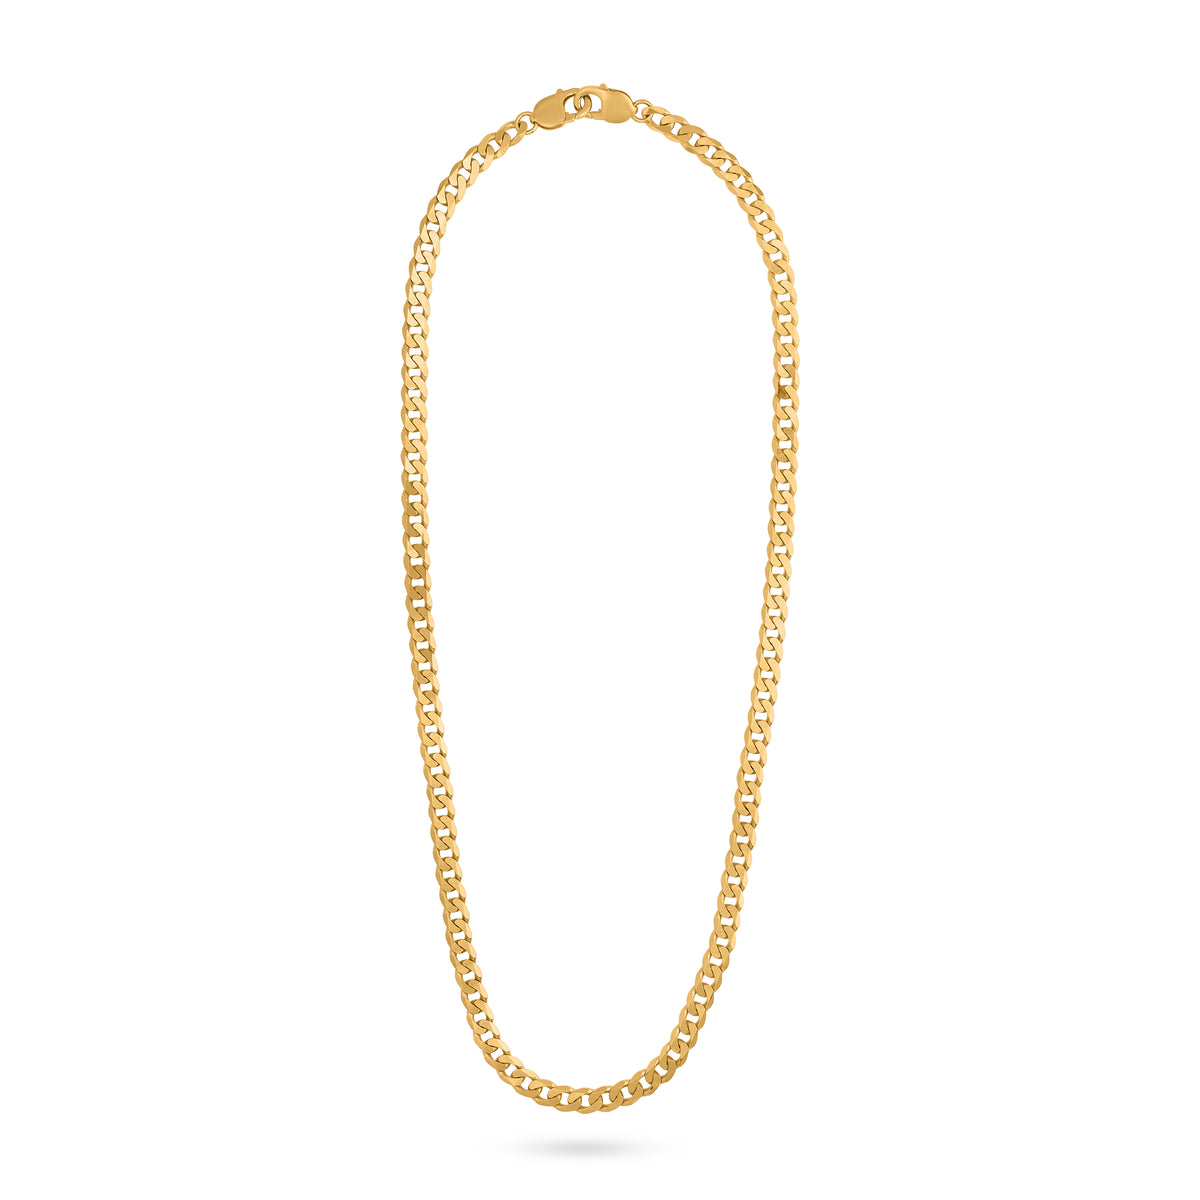 VIKA jewels WIDE CHAIN NECKLACE gold plated-Necklace-VIKA JewelsVIKA jewels self love collection wide chain necklace kette fusskette ancle recycled sterling silver 18 carat gold plating vergoldet handmade bali sustainable ethical nachhaltig